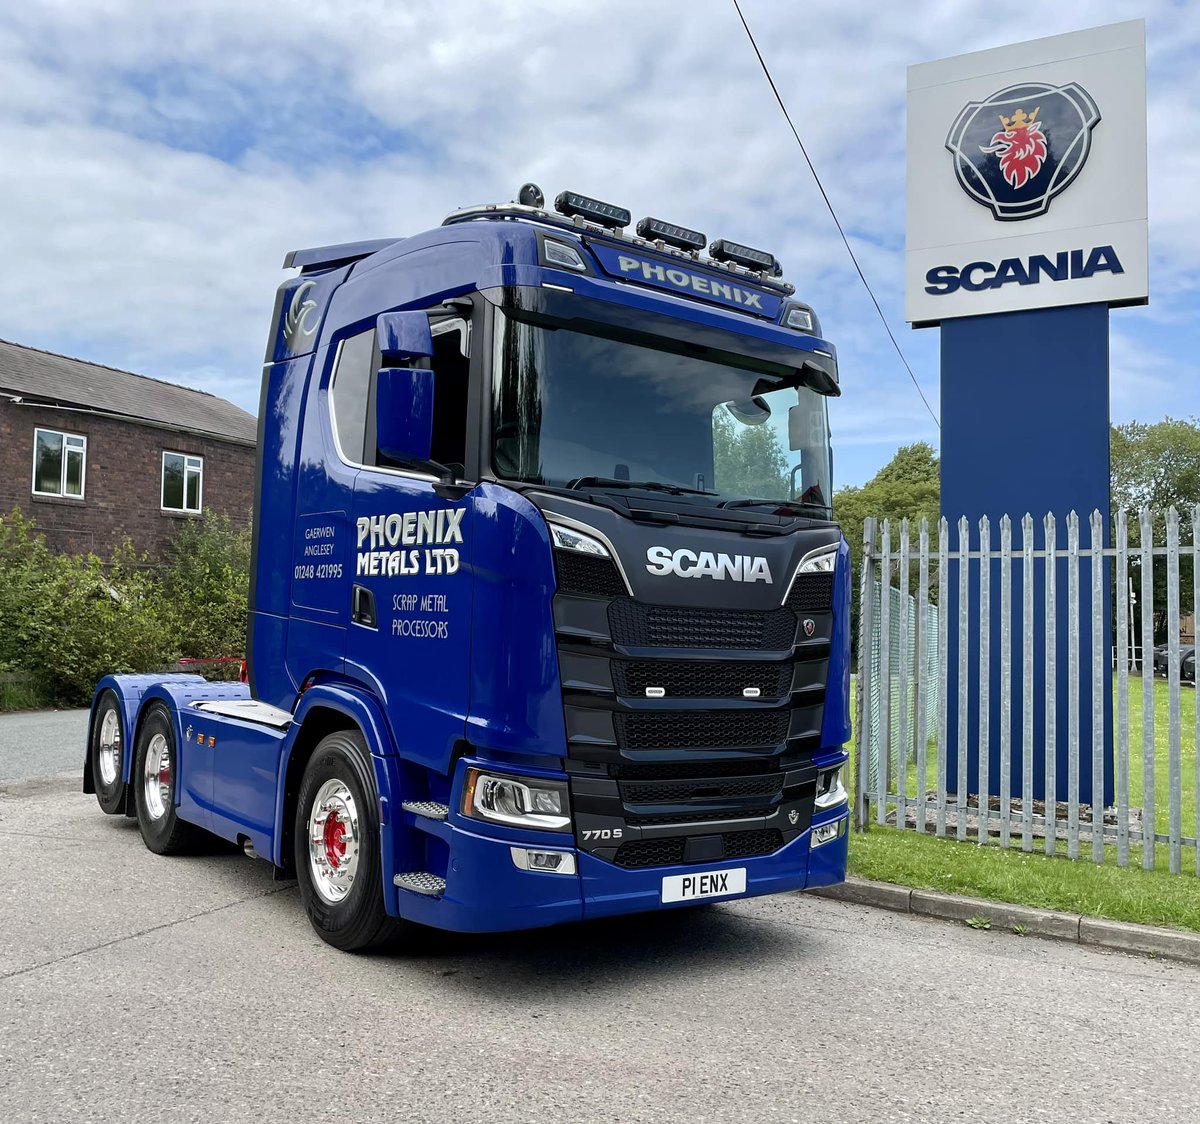 Deeside Truck Services are ready for a Monday morning delivery #phoenixmetals #770S #scania #scanianewtrucks #scaniatrucks #suppliedbyhaydockcommercials #scaniafamily